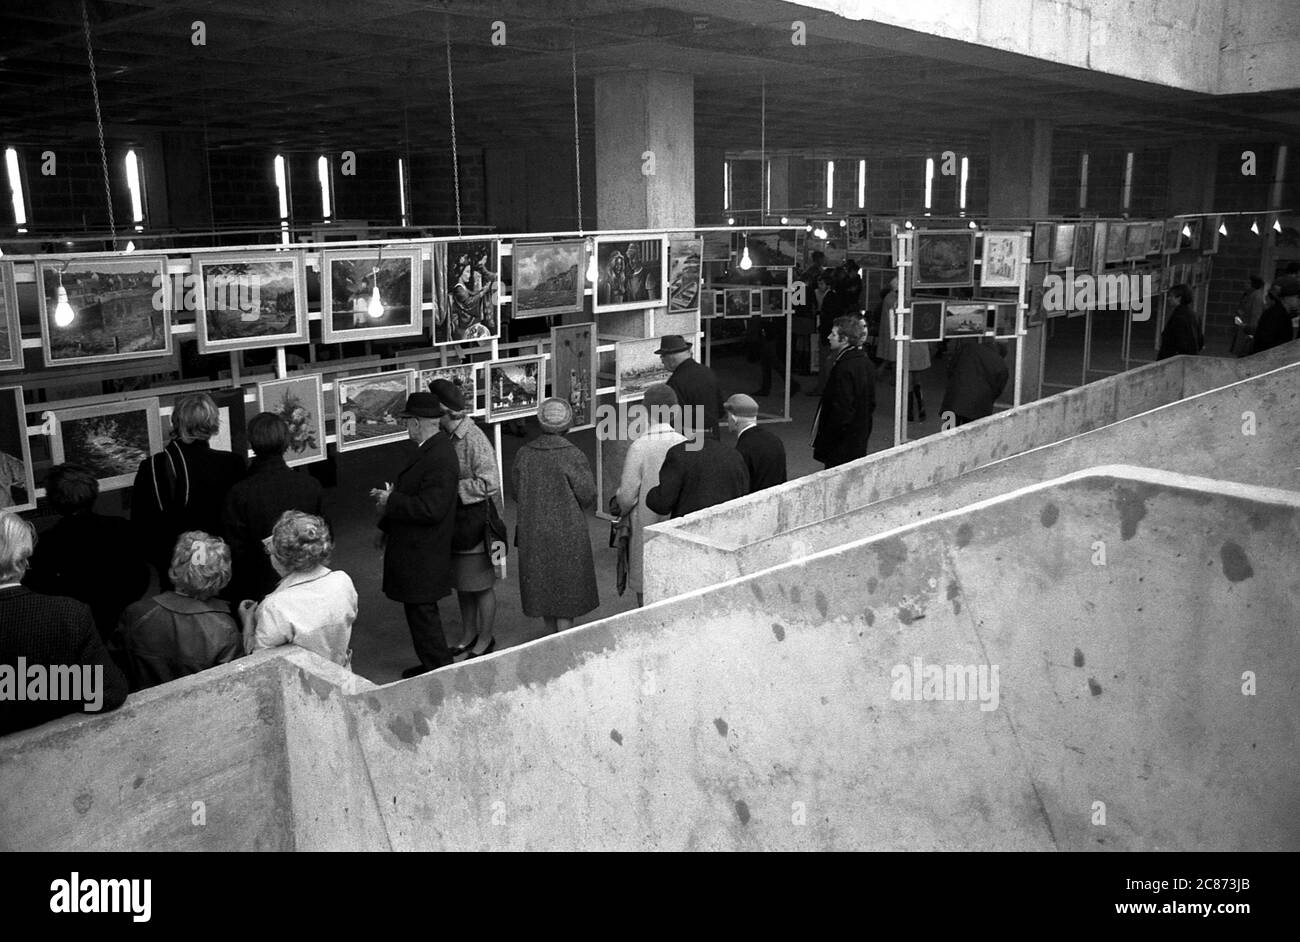 AJAXNETPHOTO. 1969. PORTSMOUTH, ENGLAND. - ART EXHIBITION - AN ART EXHIBITION STAGED IN THE CONCRETE TRICORN BUILDING ONCE VOTED 2ND UGLIEST IN BRITAIN. NOW (2020) DEMOLISHED.PHOTO:JONATHAN EASTLAND/AJAX REF:6910 34 202206 9 Stock Photo